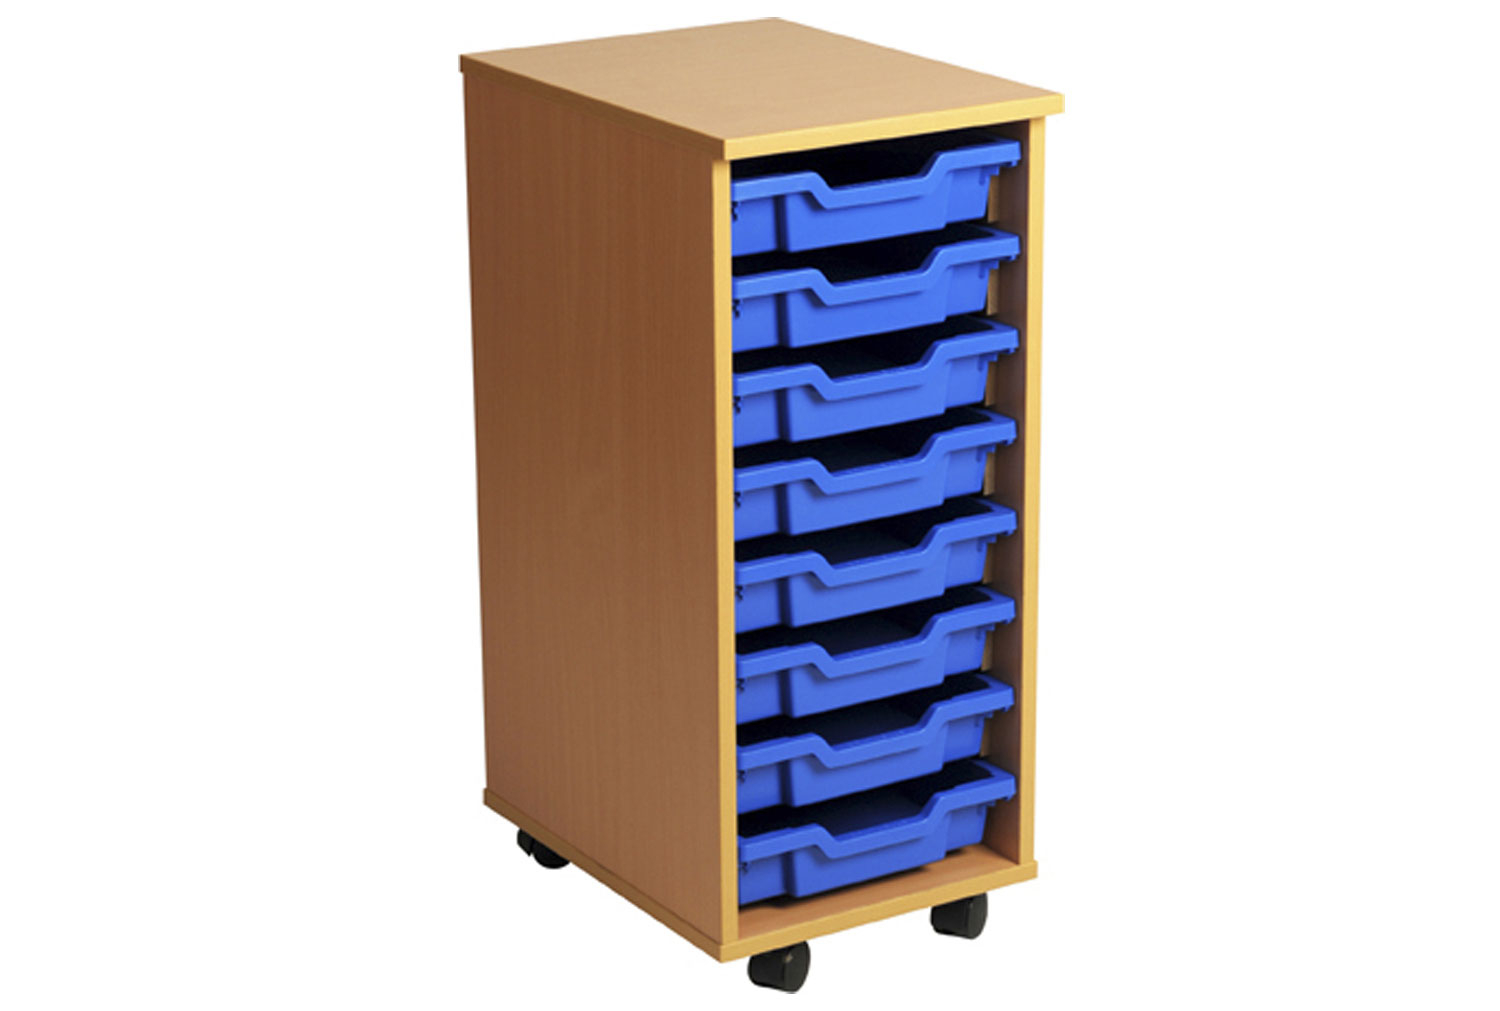 Primary Single Column Mobile Classroom Tray Storage Unit With 8 Shallow Classroom Trays, Beech/ Translucent Classroom Trays